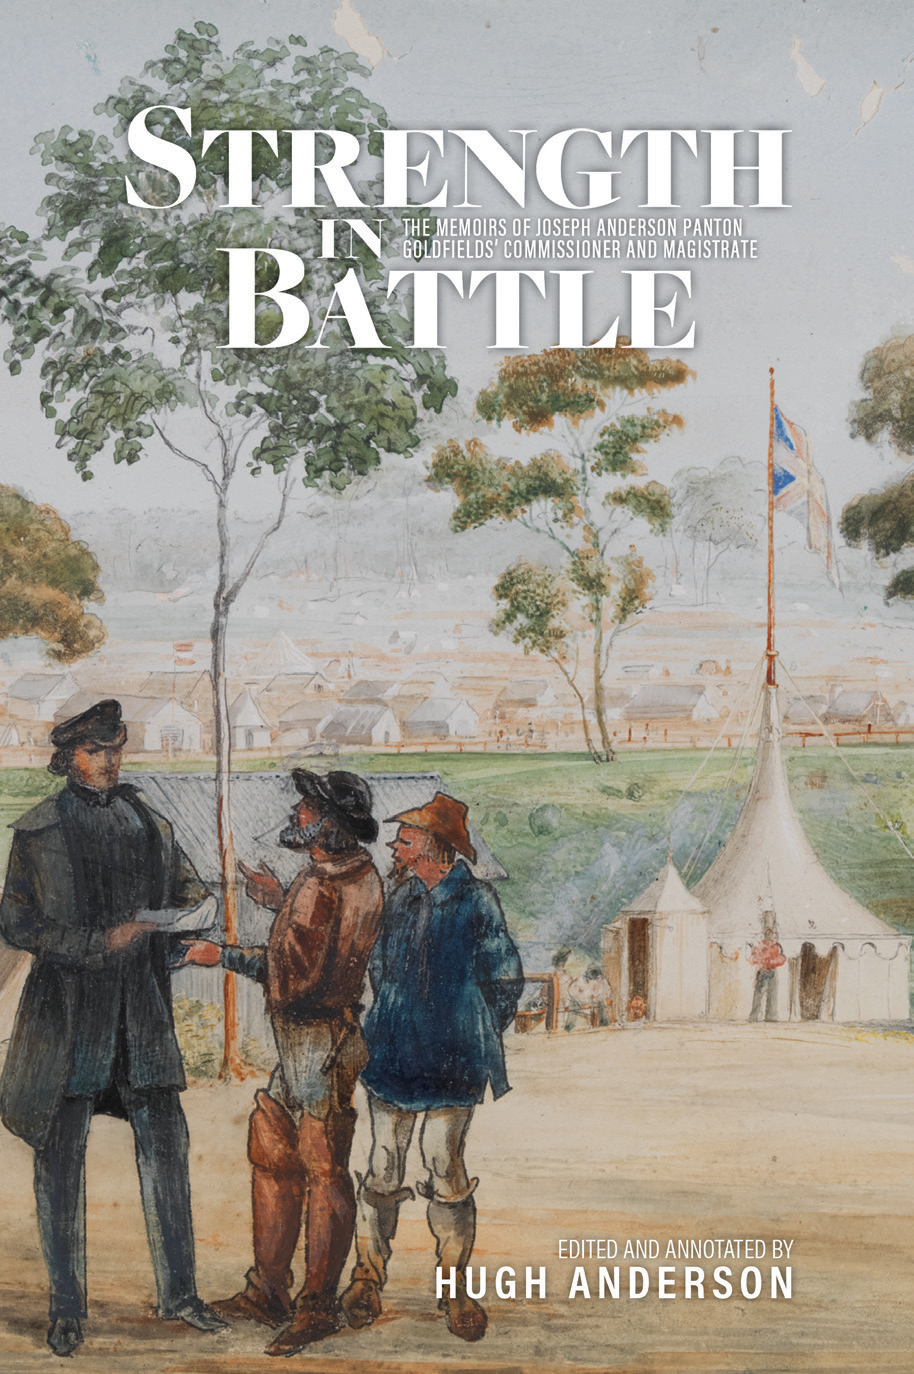 Strength Battle: The Memoirs of Joseph Anderson Goldfields' Commissioner and Magistrate – Australian Scholarly Publishing